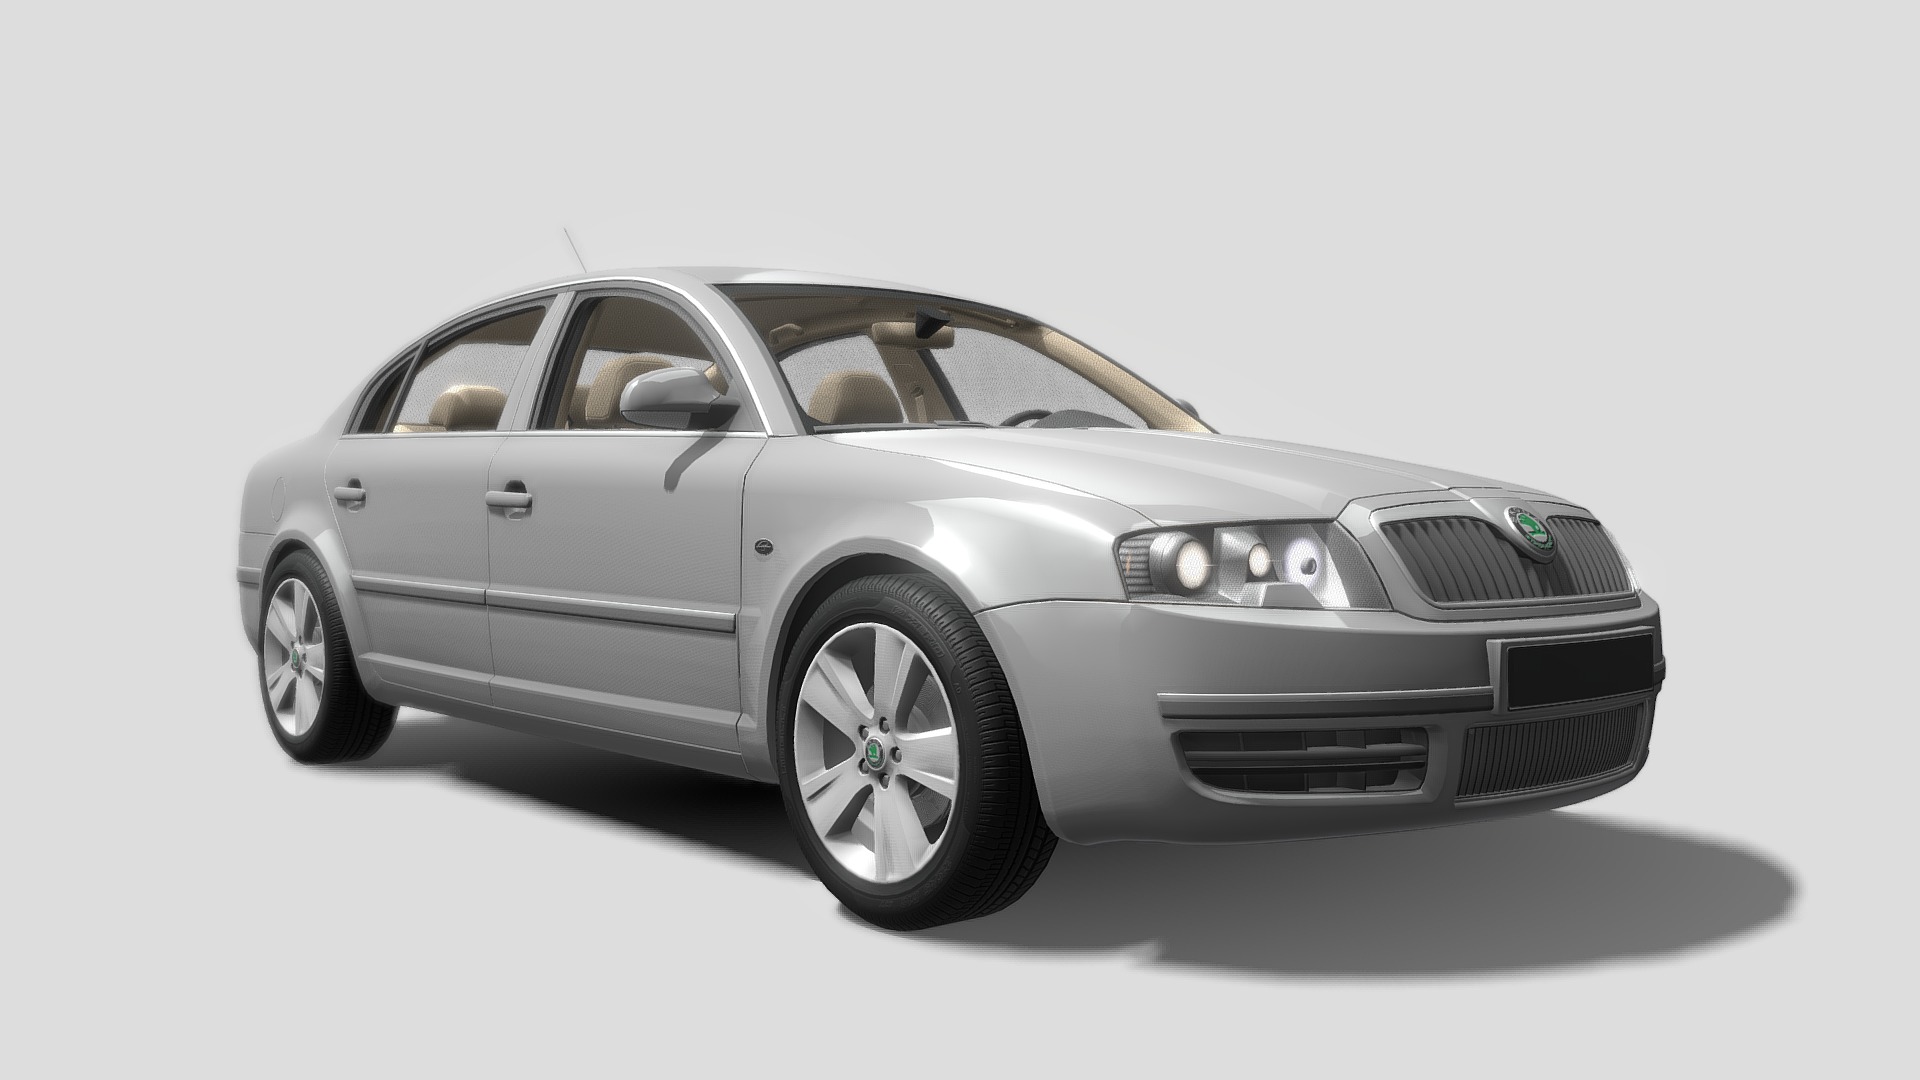 3D model Skoda Salooncar Model - This is a 3D model of the Skoda Salooncar Model. The 3D model is about a silver car with a white background.